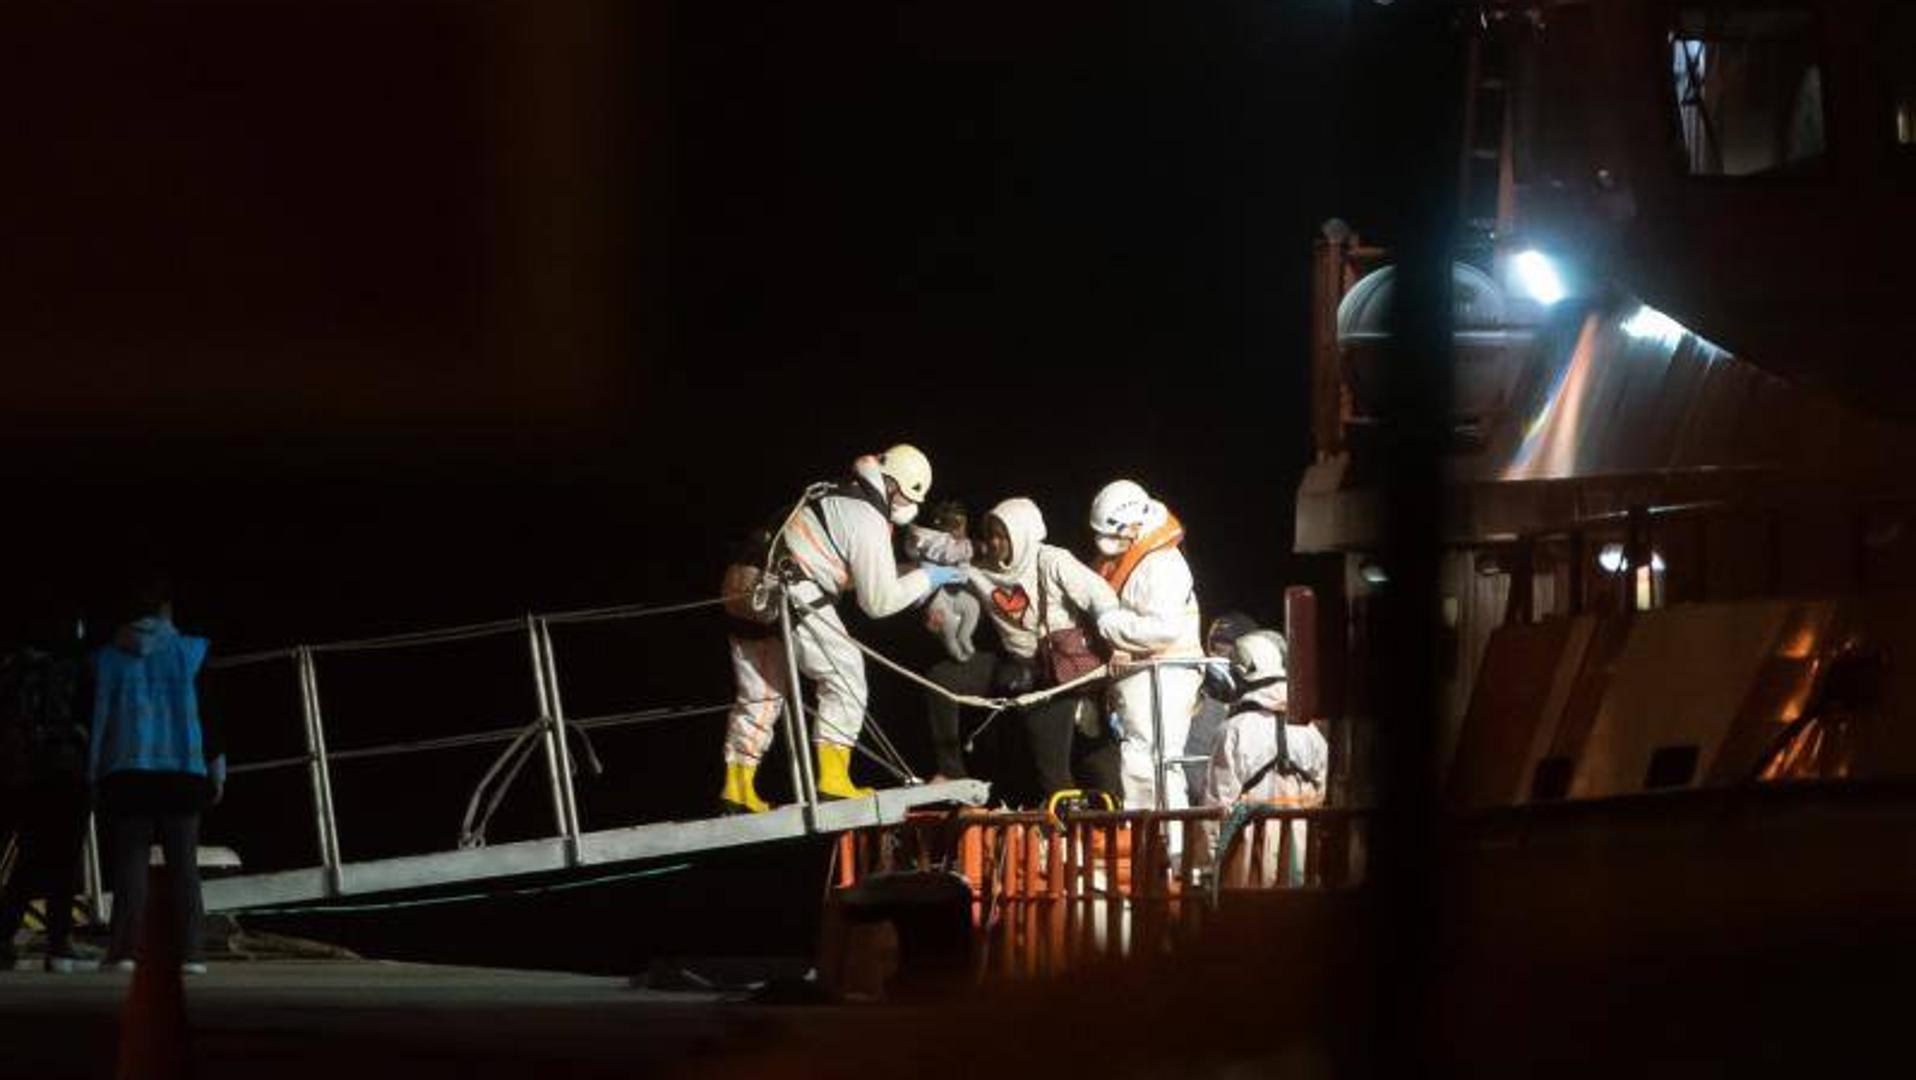 They rescue 52 immigrants on the coast of Lanzarote